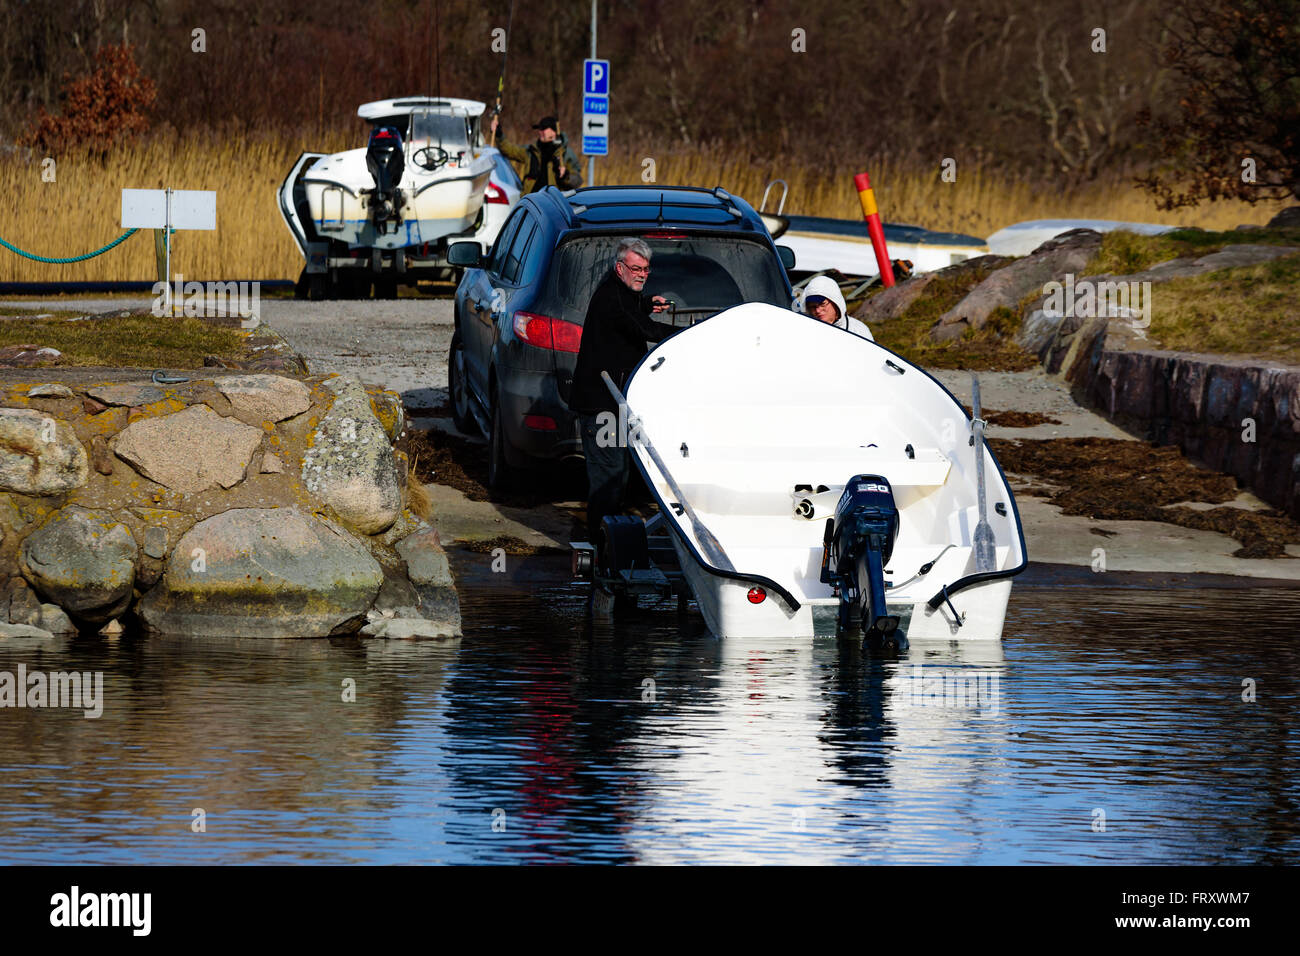 Torhamn, Sweden - March 18, 2016: The launching of a small plastic motor boat at a ramp in the marina. Boat is loaded off a trai Stock Photo